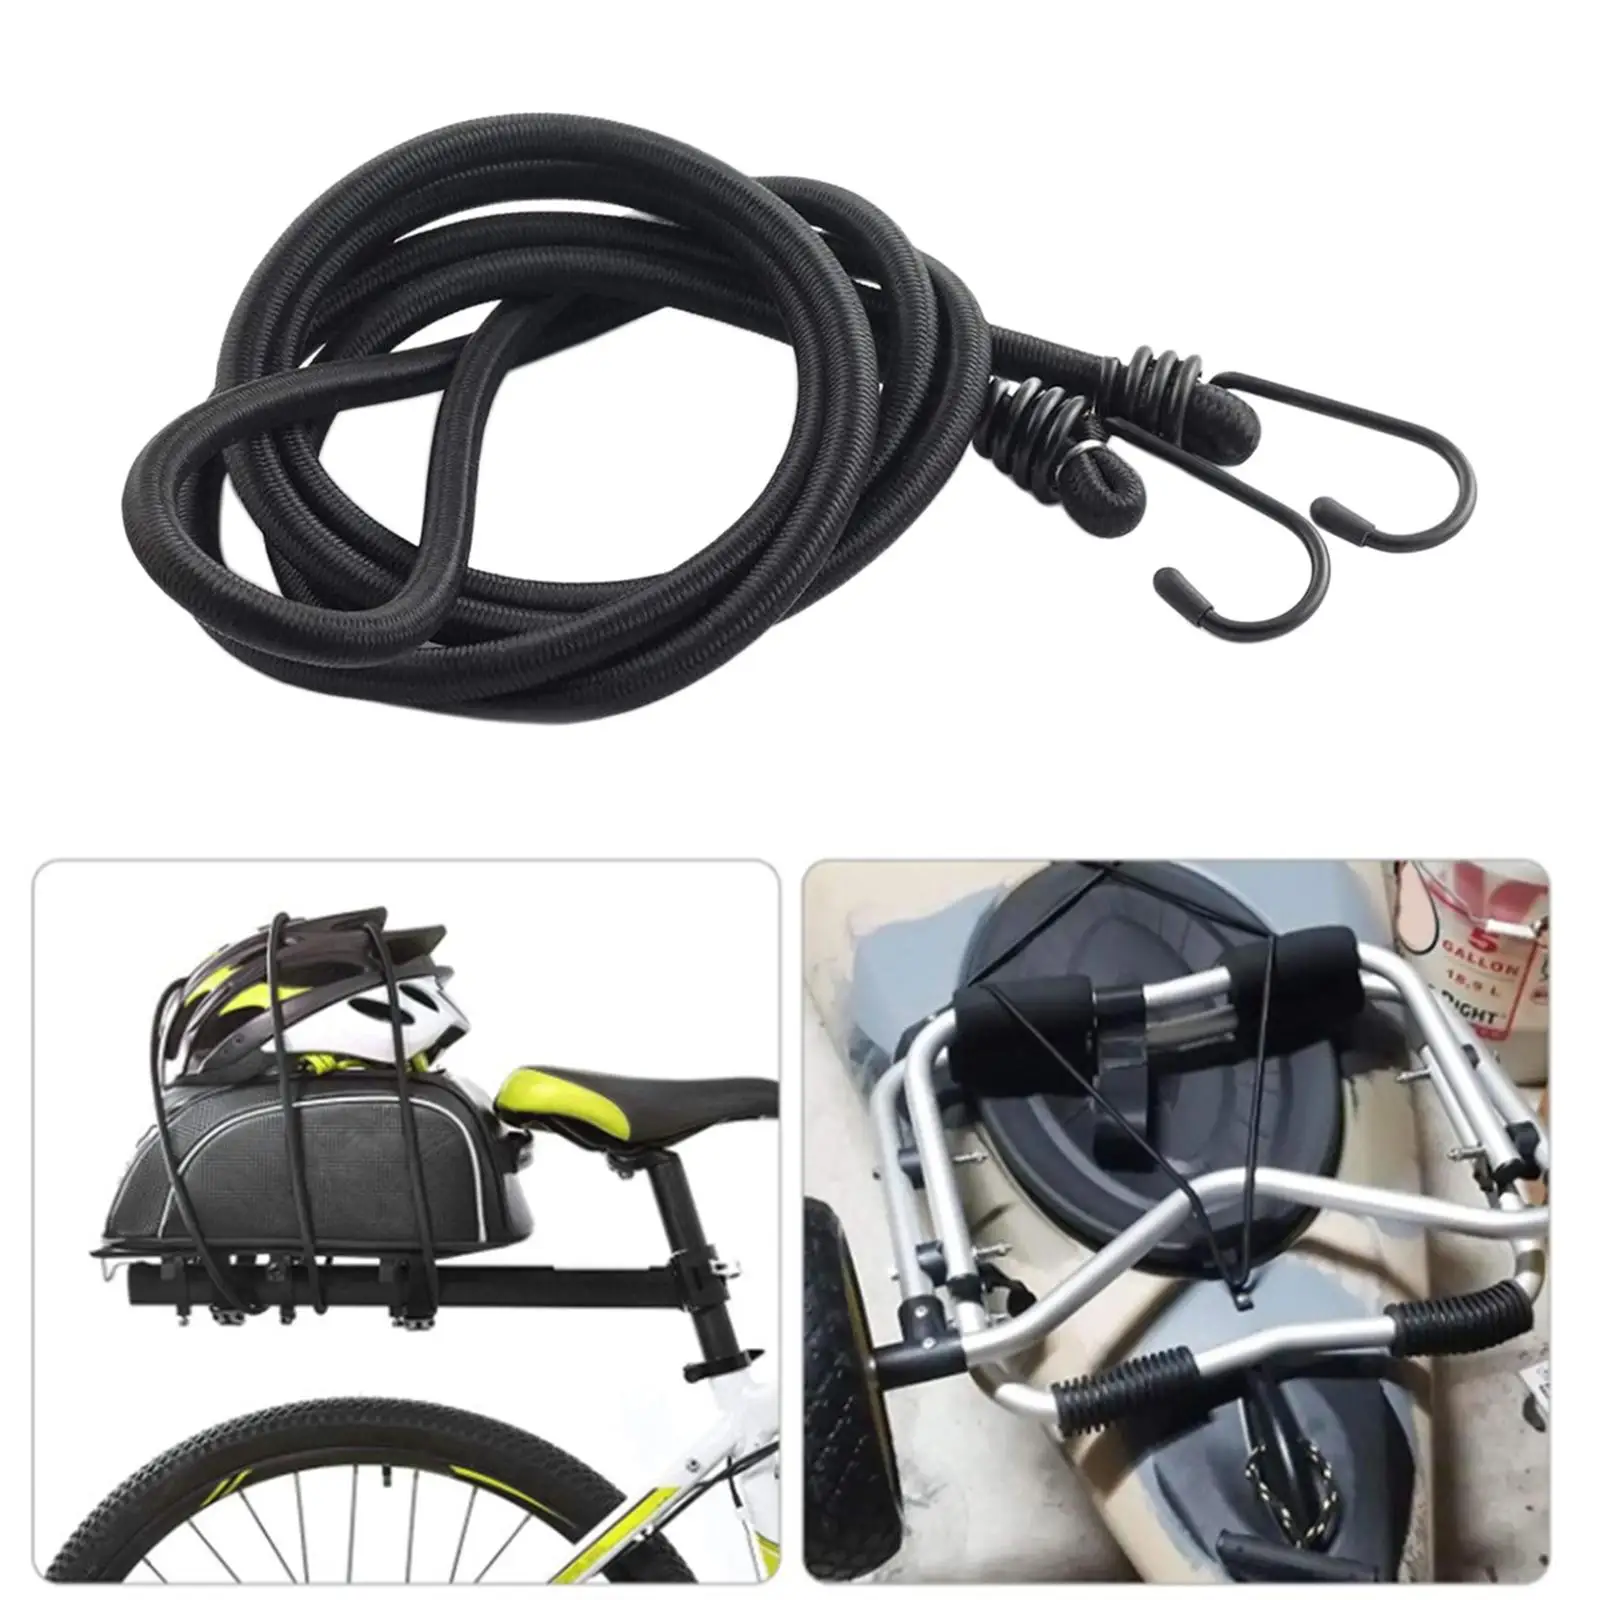 Elastic  Cords, Heavy Duty  Ropes Straps with Hooks for Bike Motorbike Car Trunks Camping RVs Luggage Racks